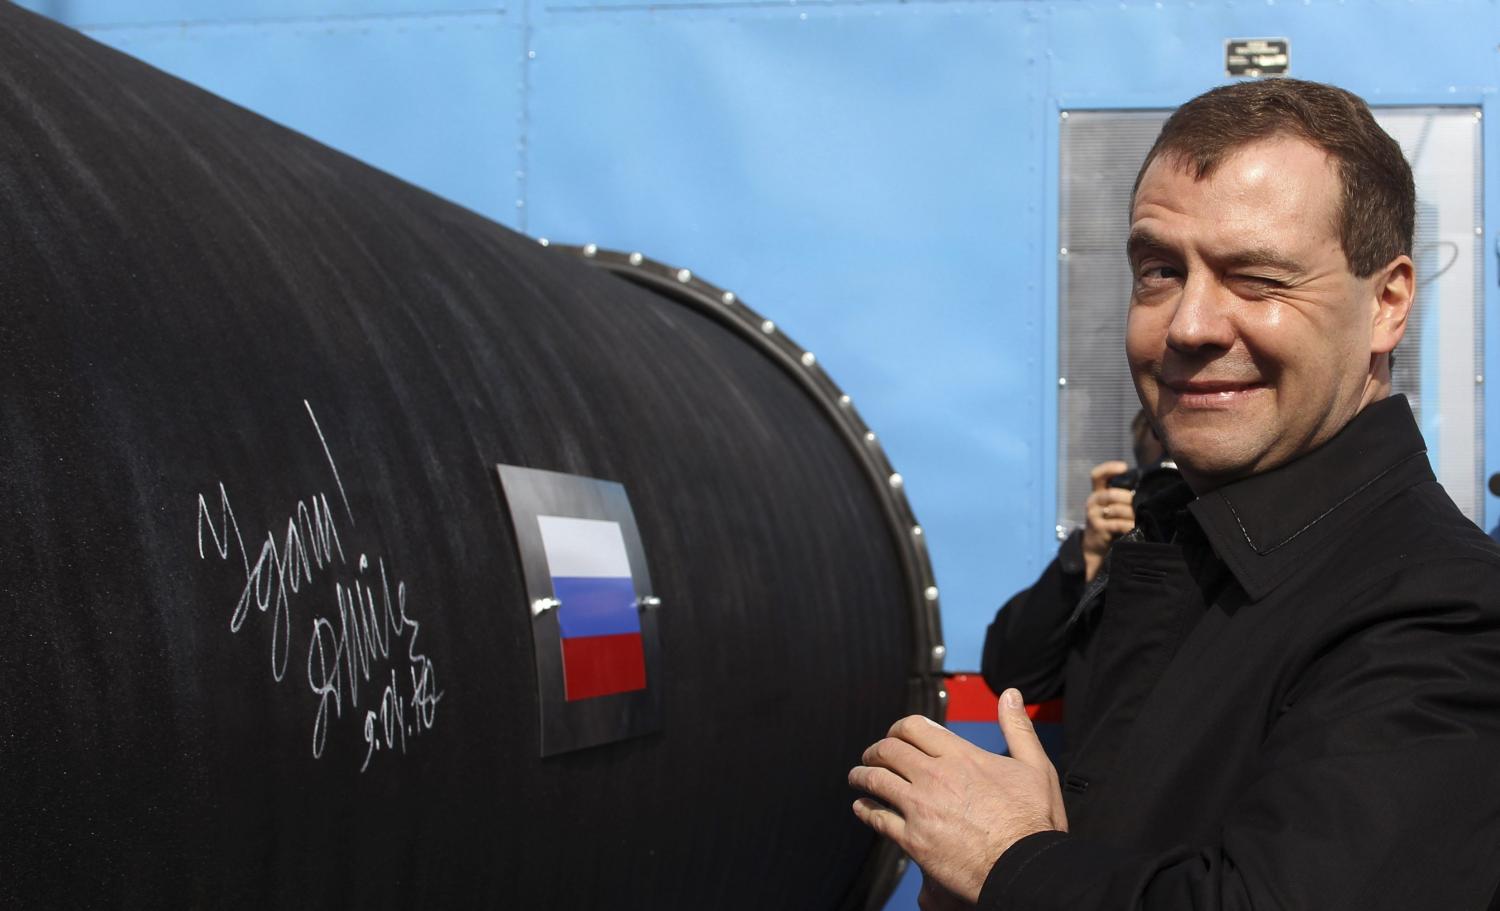 Russian President Dmitry Medvedev gestures after writing 'Good Luck!' on a pipe of the Nord Stream pipeline near Russian town of Vyborg, April 9, 2010. Medvedev took part in the ceremony on Friday to start building the pipeline, which was designed to help Russia increase its influence in EU gas markets from the current 25 percent to about a third.  REUTERS/Alexander Demianchuk  (RUSSIA - Tags: POLITICS ENERGY BUSINESS) - GM1E6491EYC01